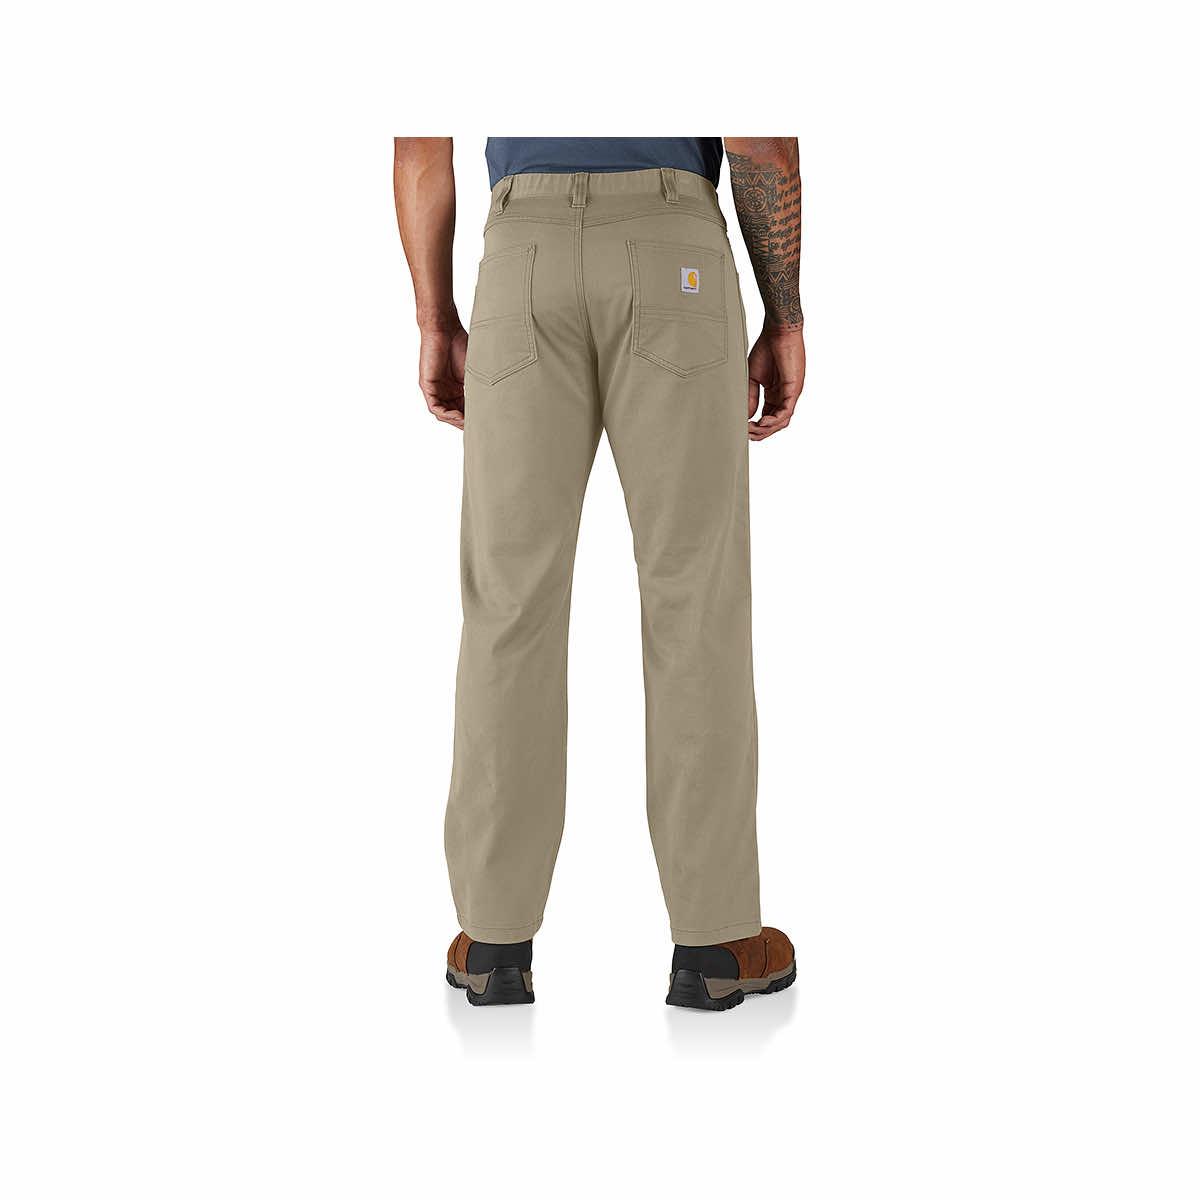 Tough Duck  Relaxed Fit Fleece Lined Flex Twill Cargo Pant with